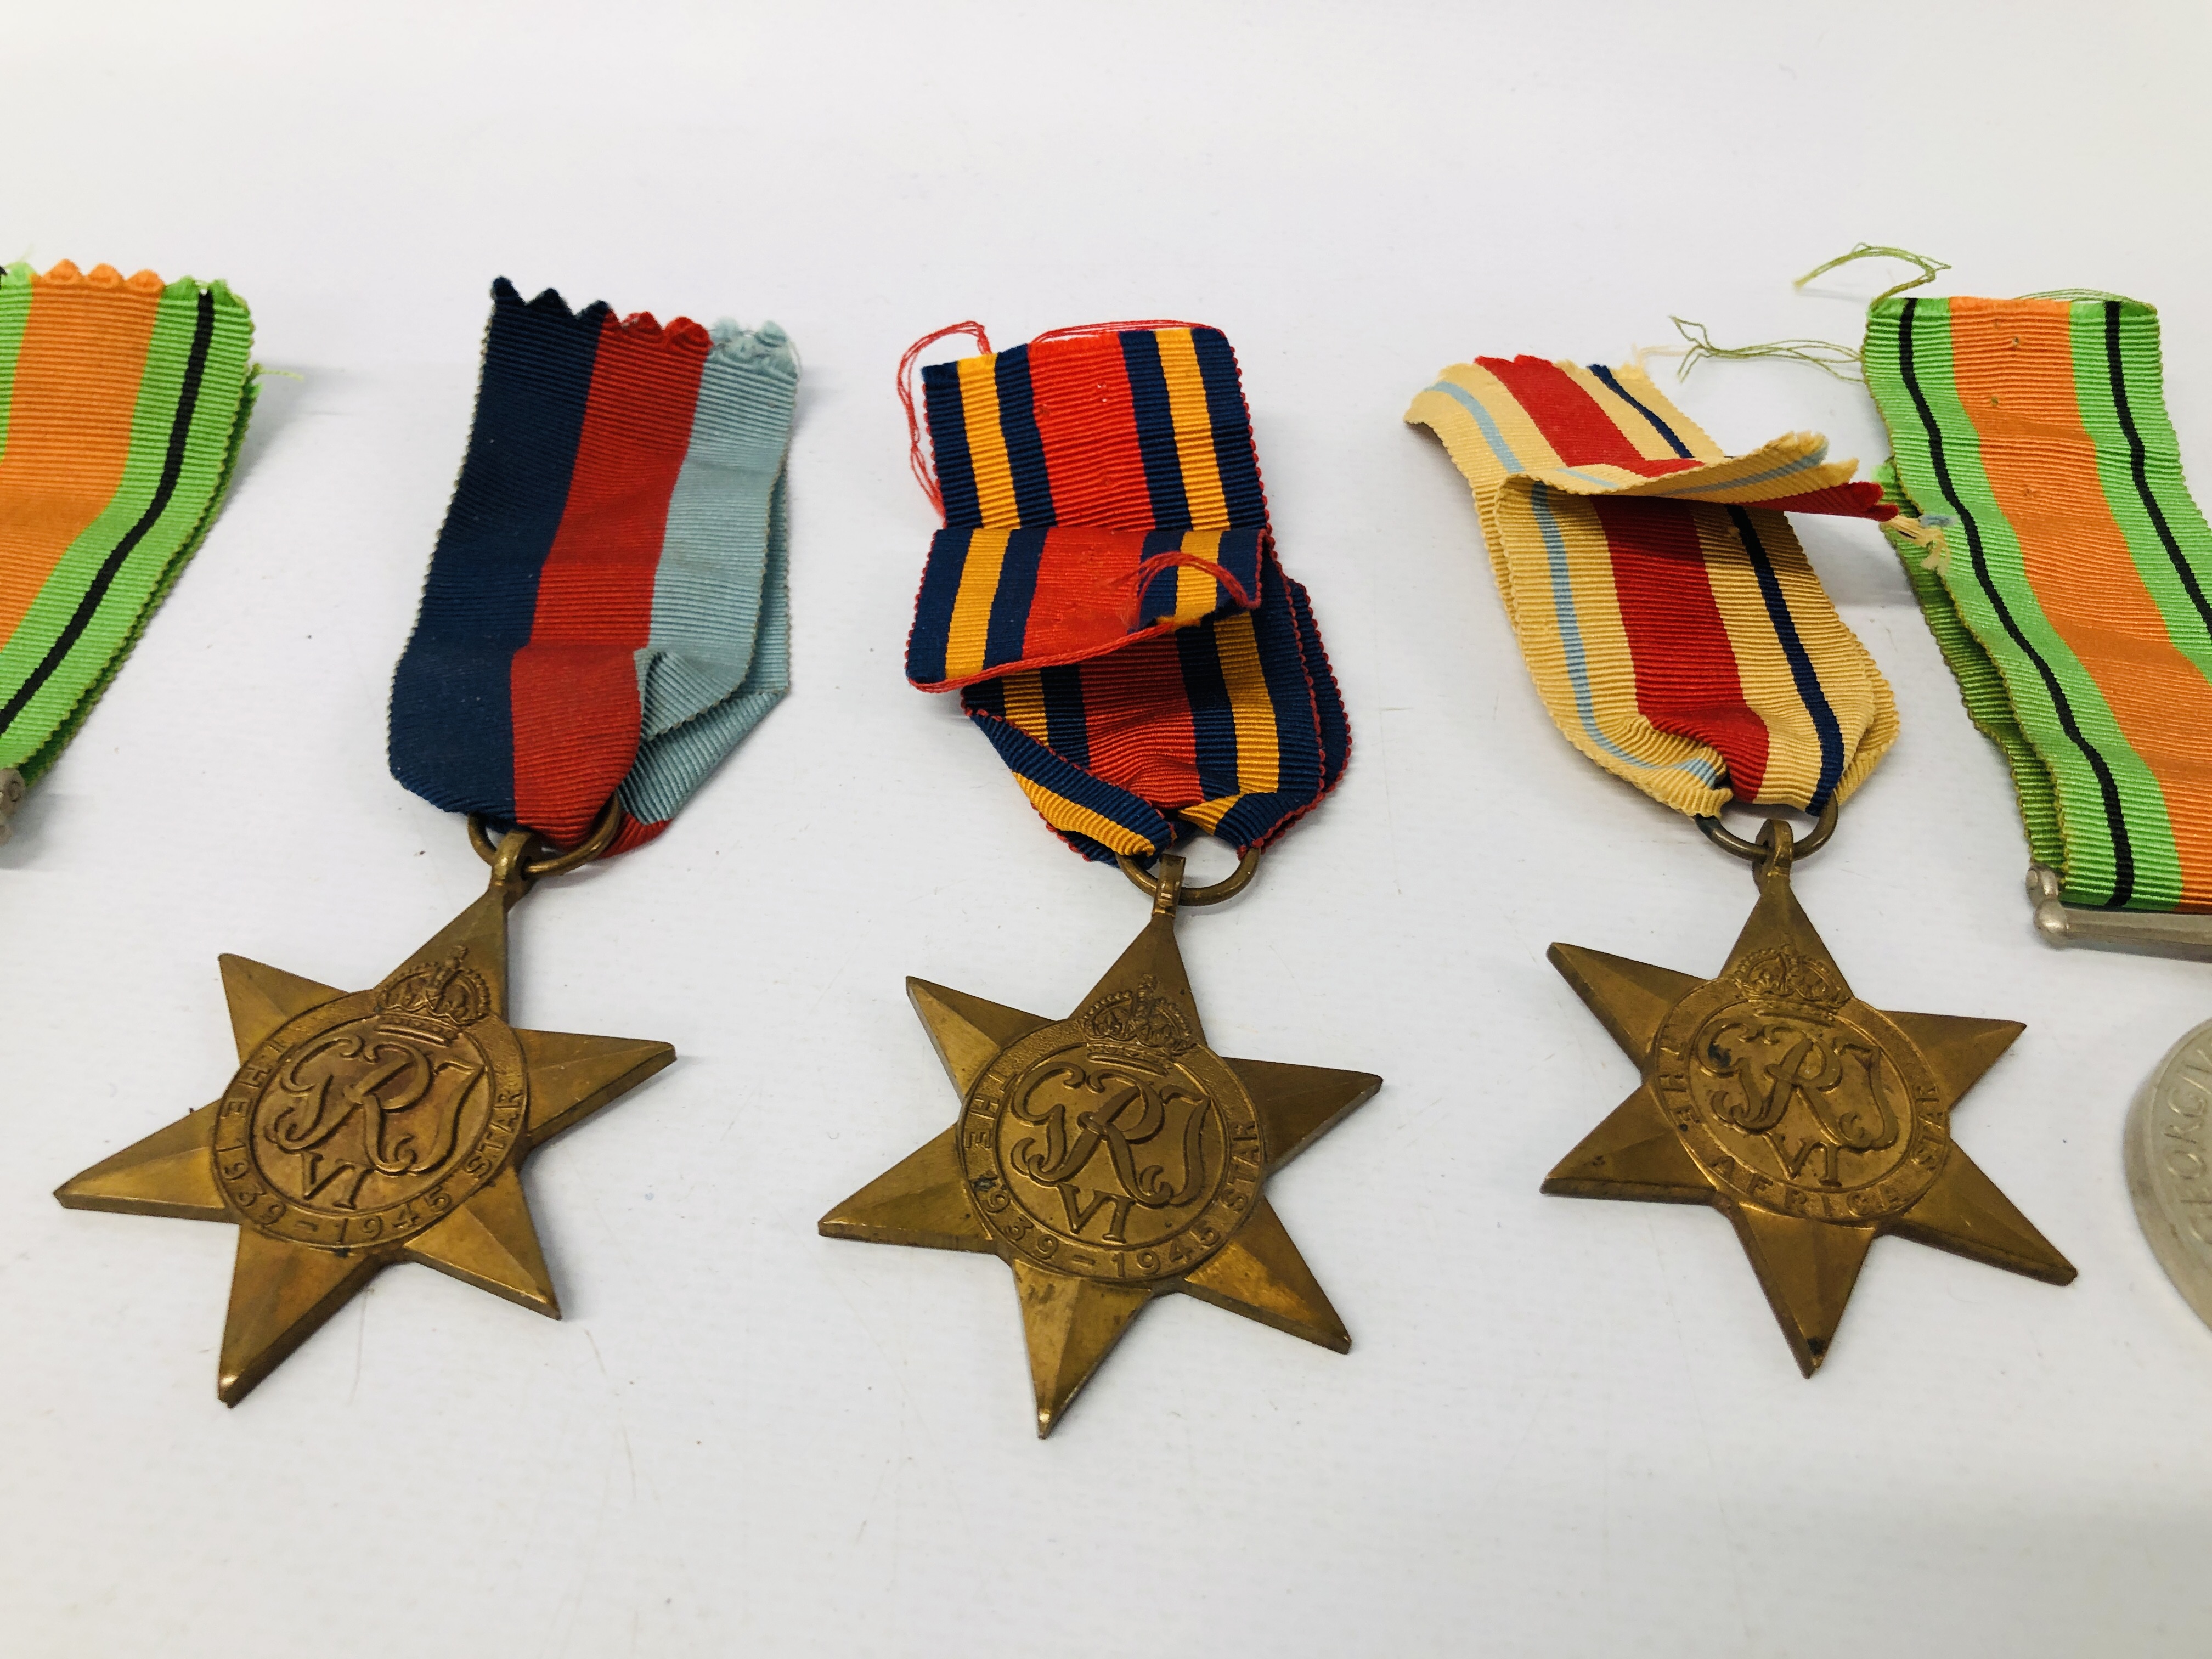 TWO WWII MEDALS, TWO WWII DEFENCE MEDALS, TWO 39-45 STARS, AN AFRICA STAR AND A BURMA STAR, - Image 3 of 7